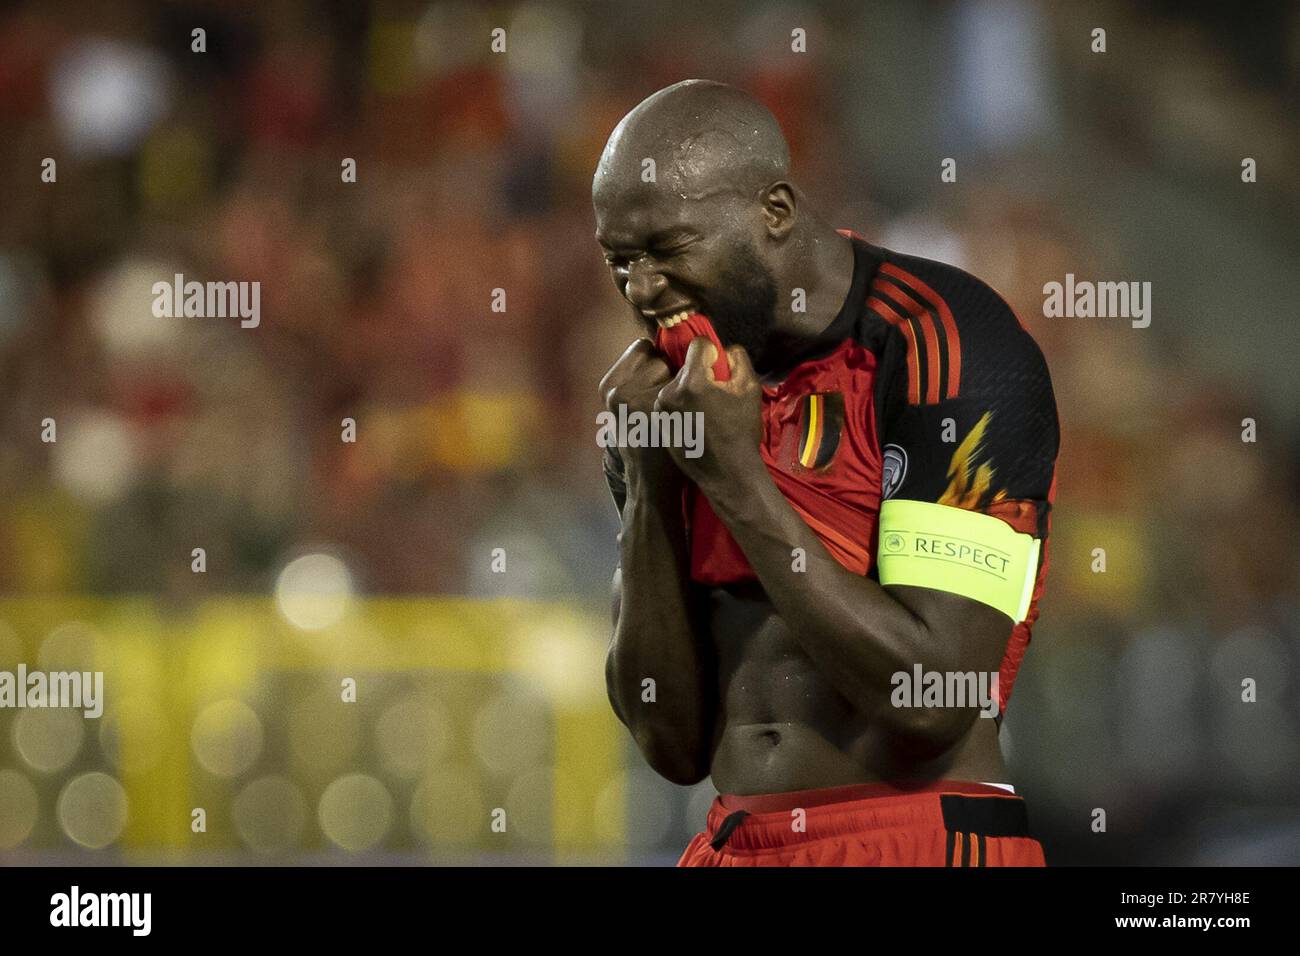 Belgium's Romelu Lukaku celebrates after scoring during a soccer game  between the Belgian national team Red Devils and Denmark, Wednesday 18  November 2020 in Leuven, on the sixth and last day of